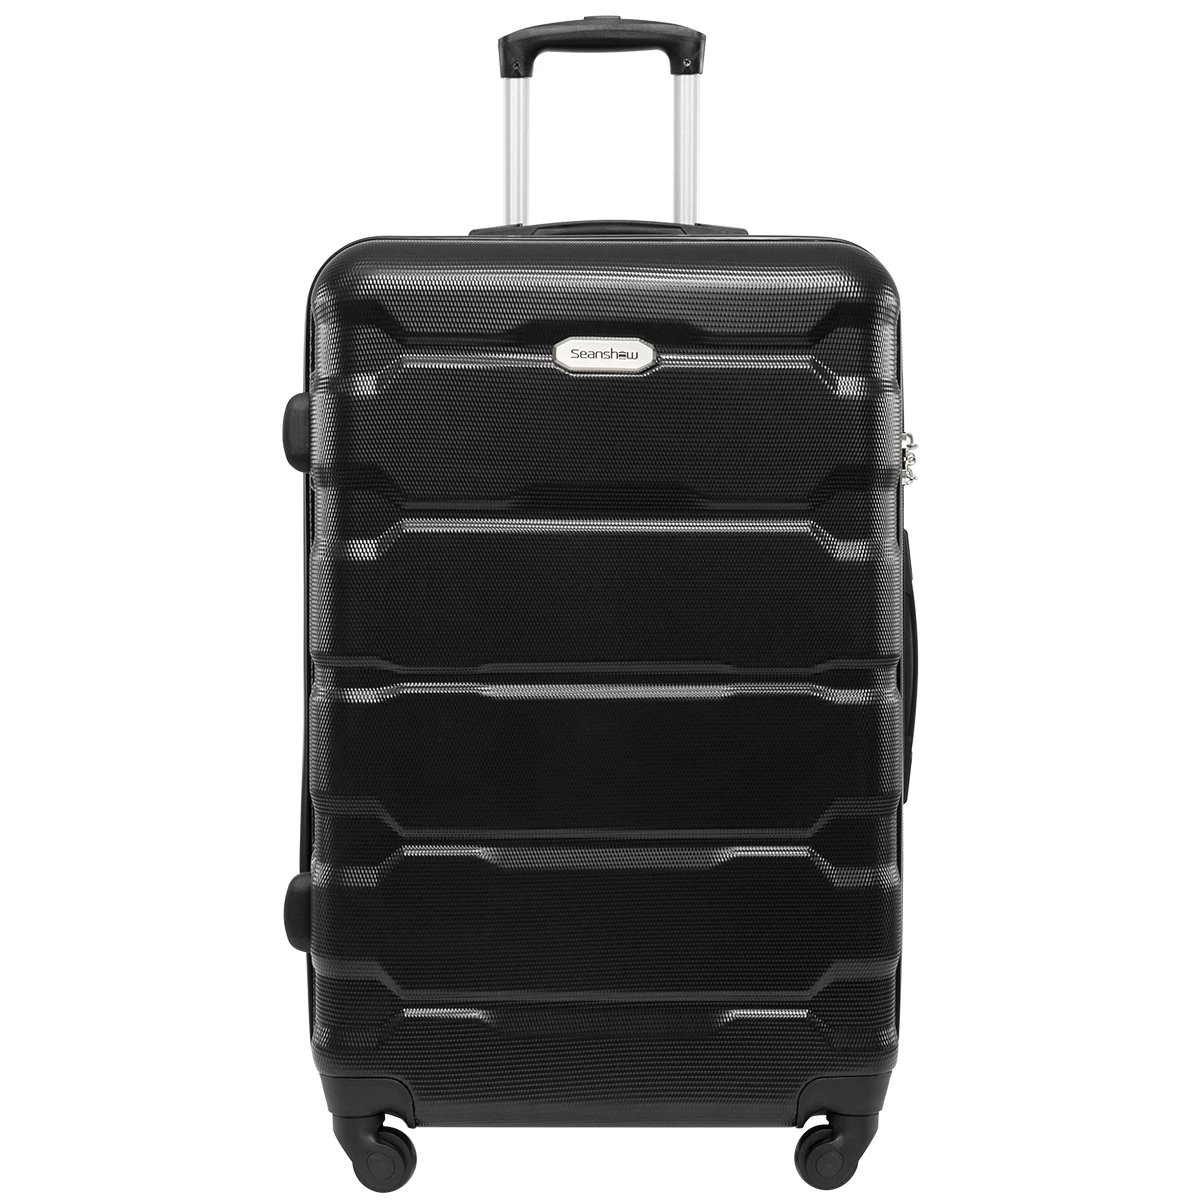 Sets Suit On Wheels Women Spinner Rolling Luggage Abs Travel